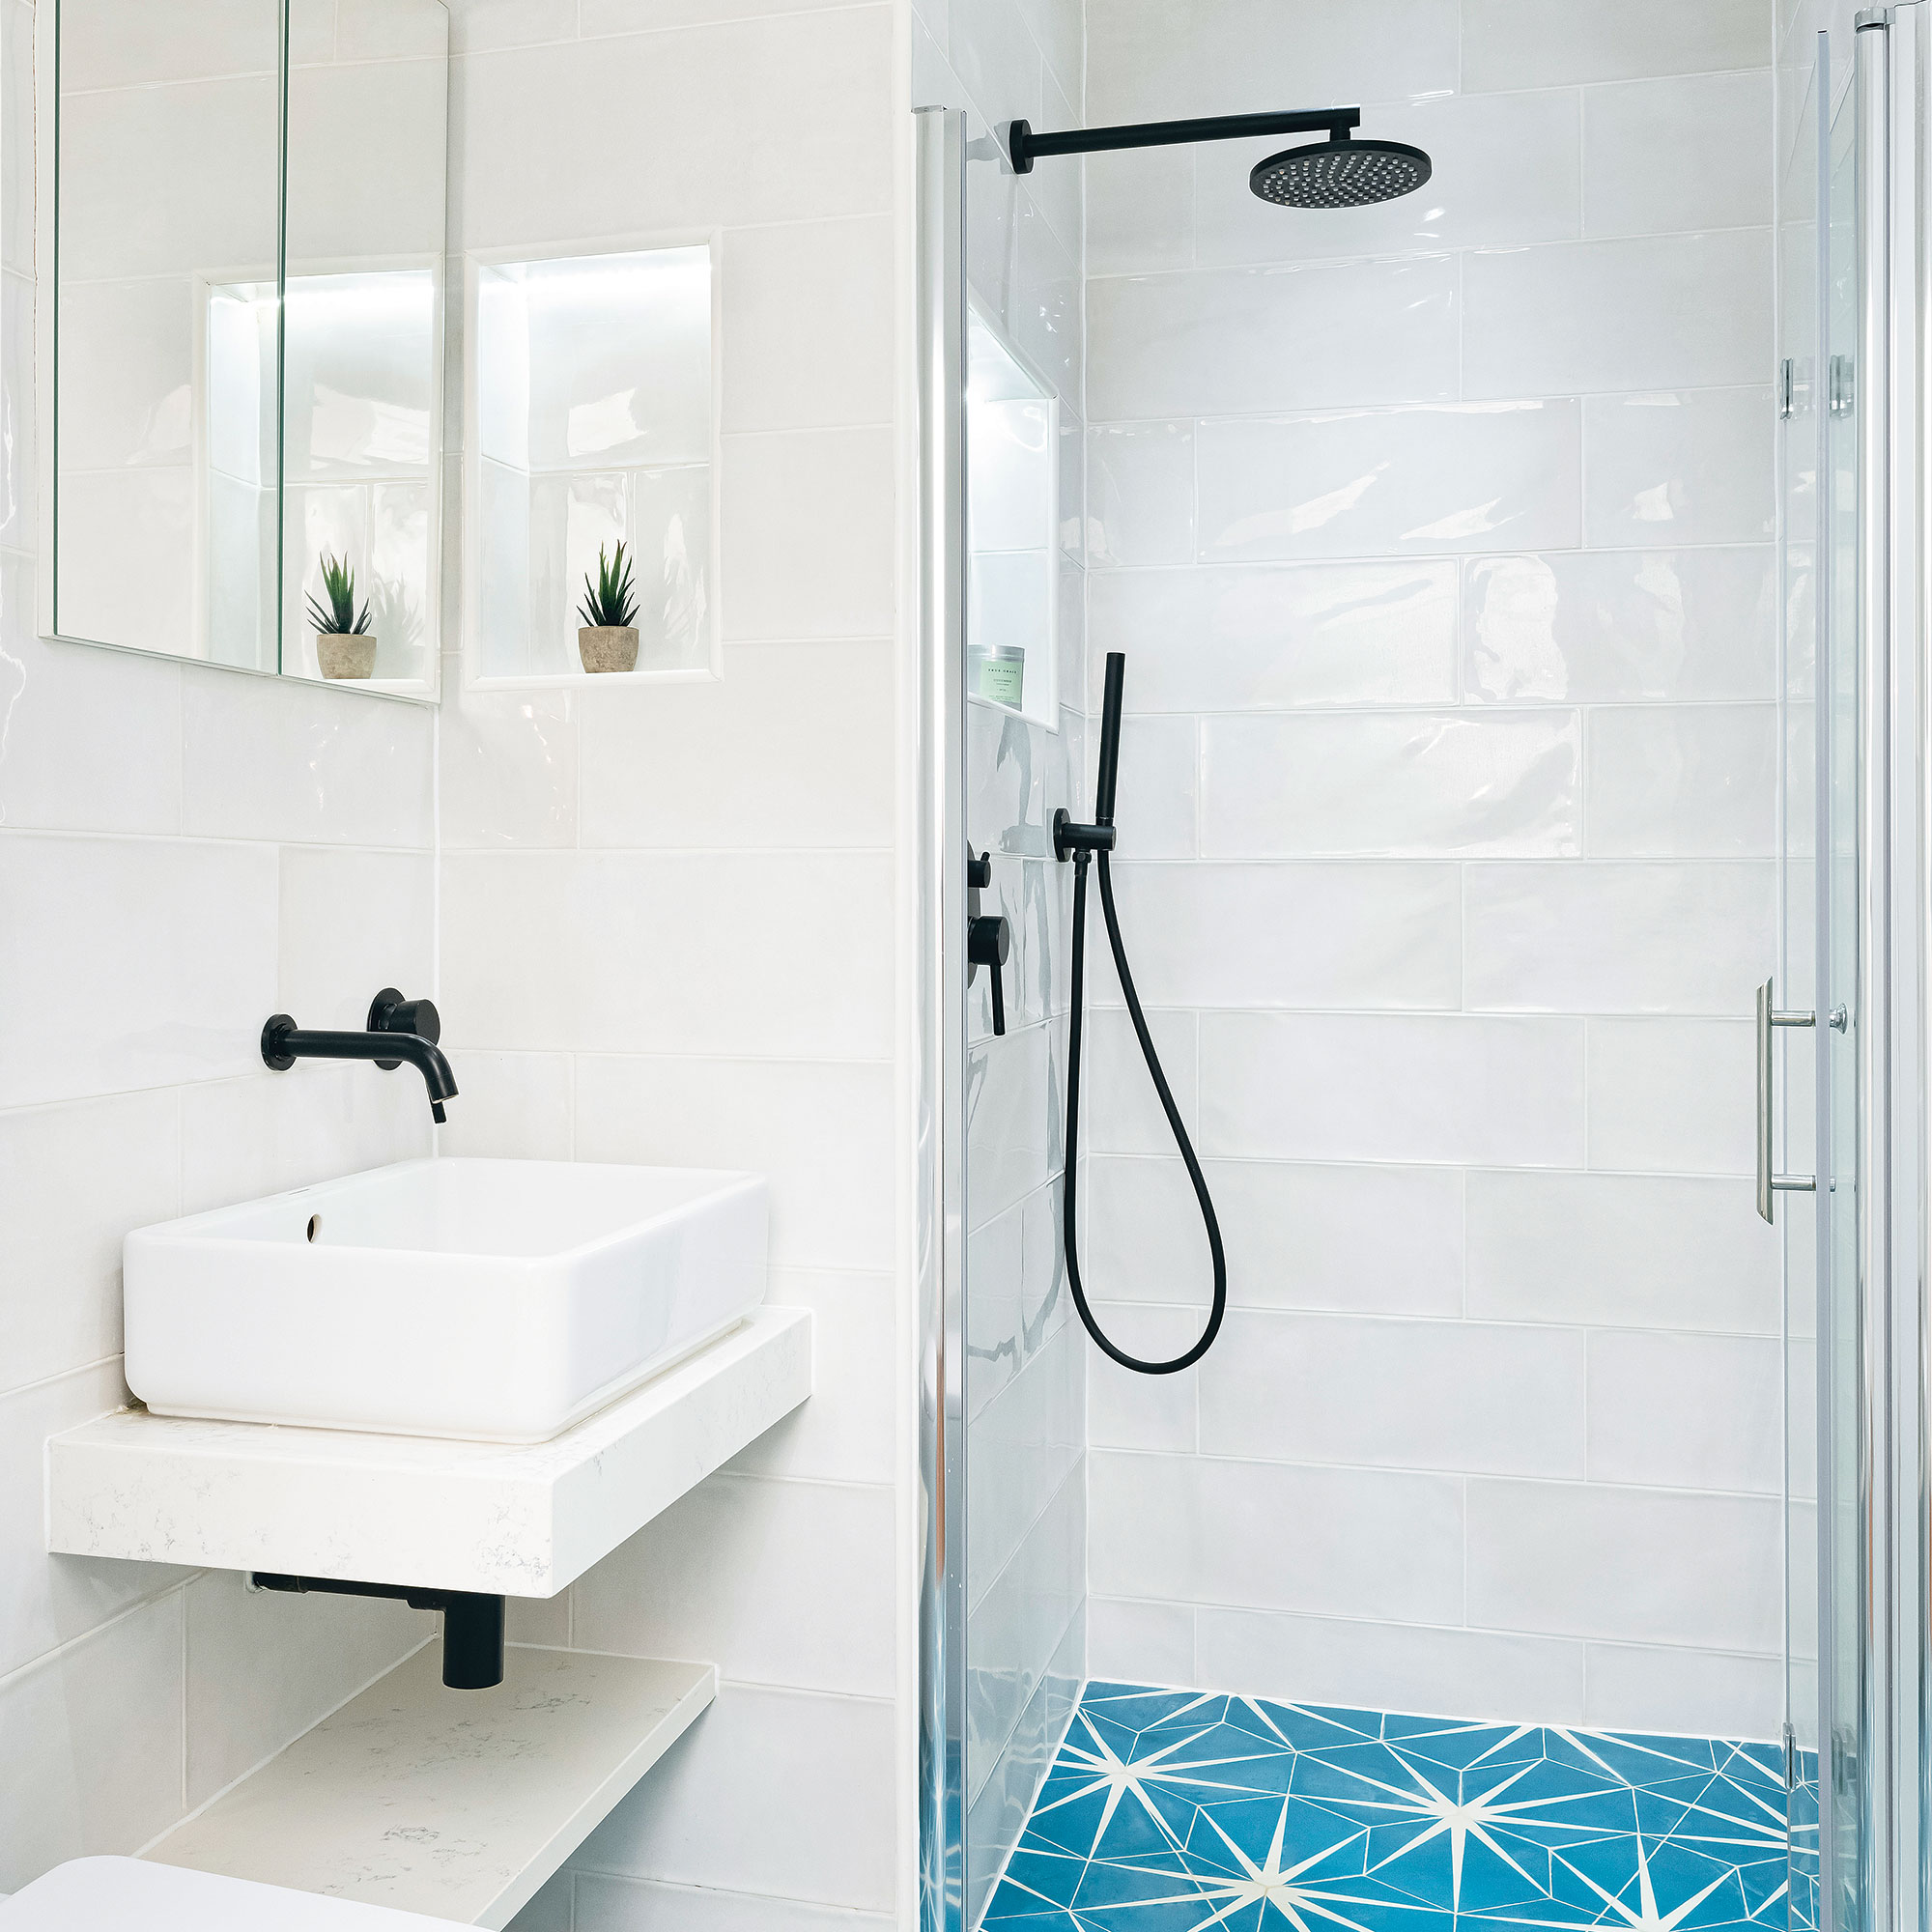 White bathroom with bright blue patterned tile shower floor